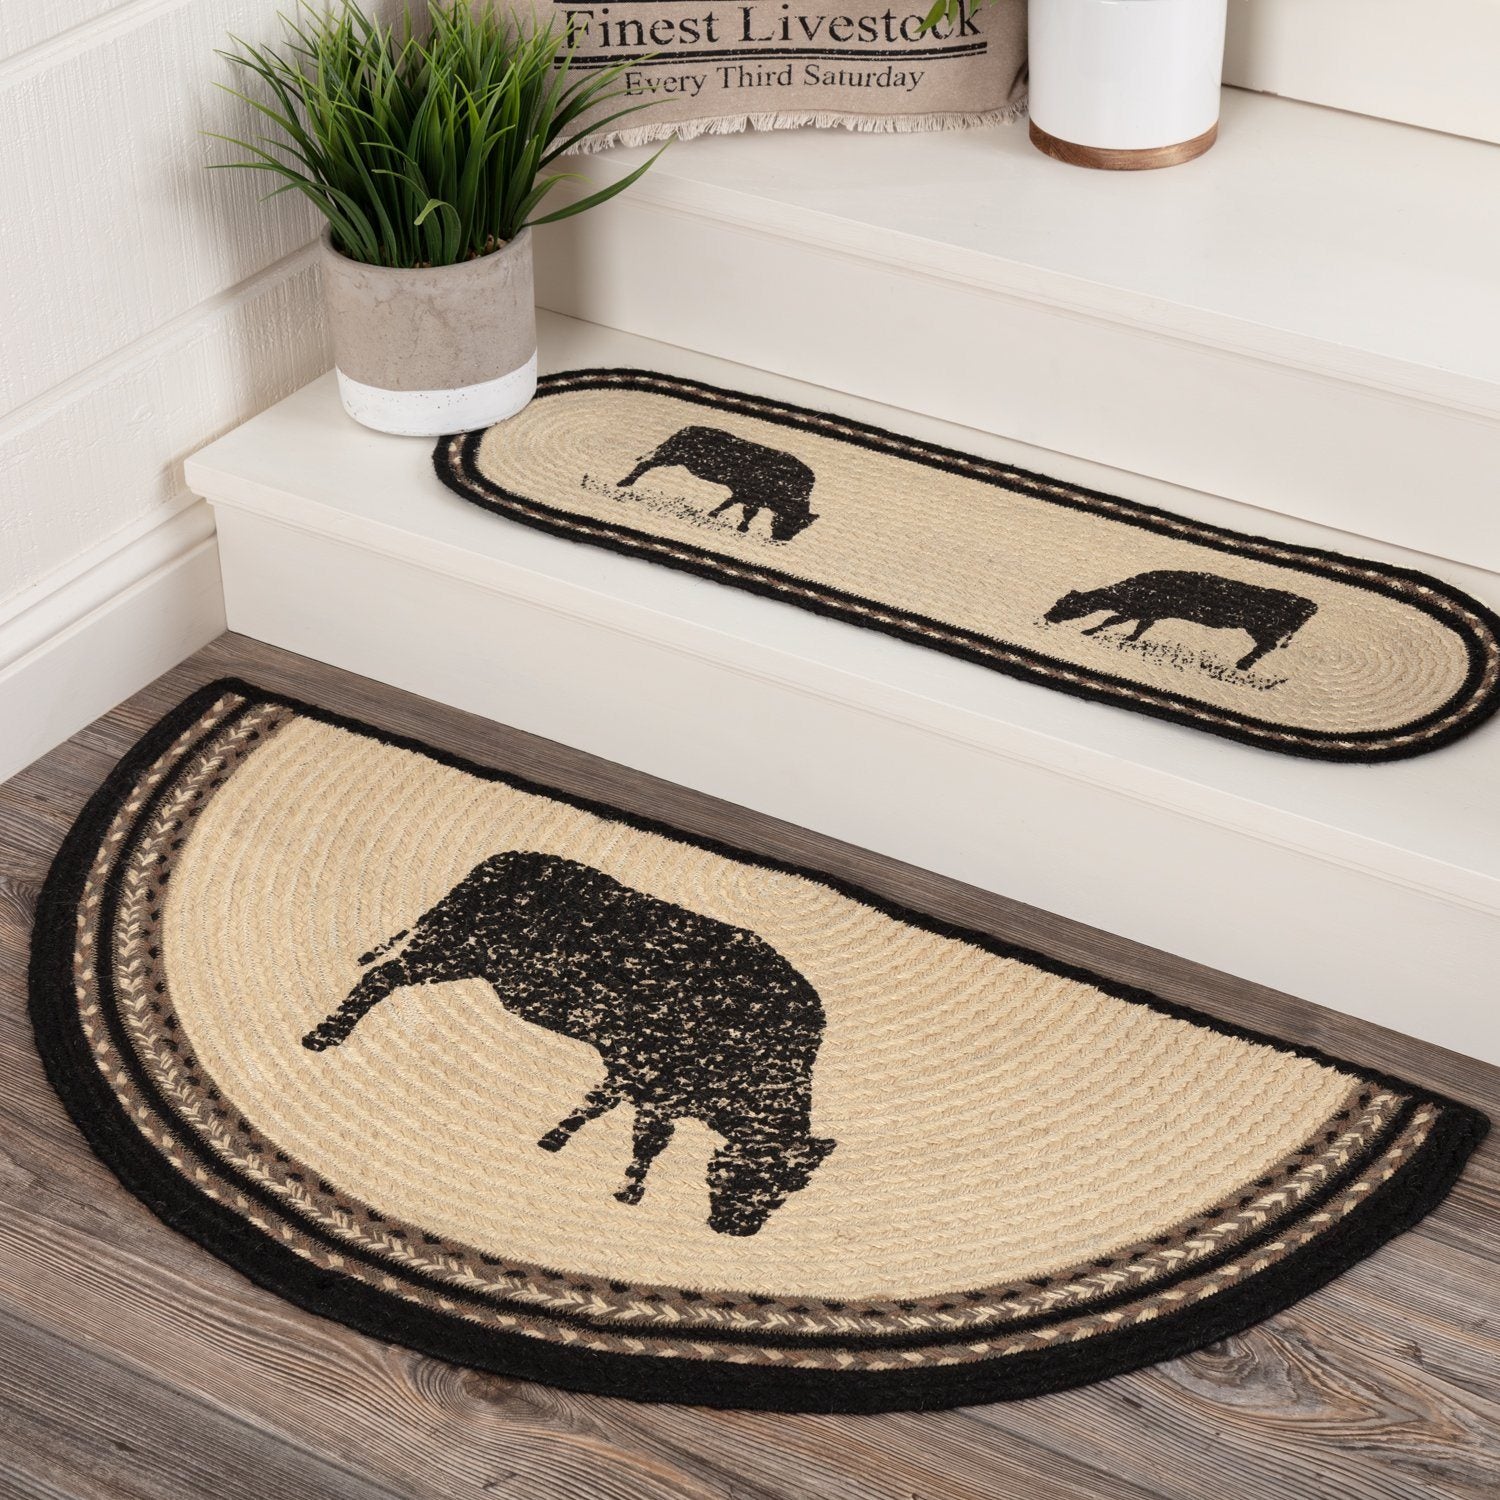 Sawyer Mill Charcoal Cow Button Loop Kitchen Towel - Set of 2